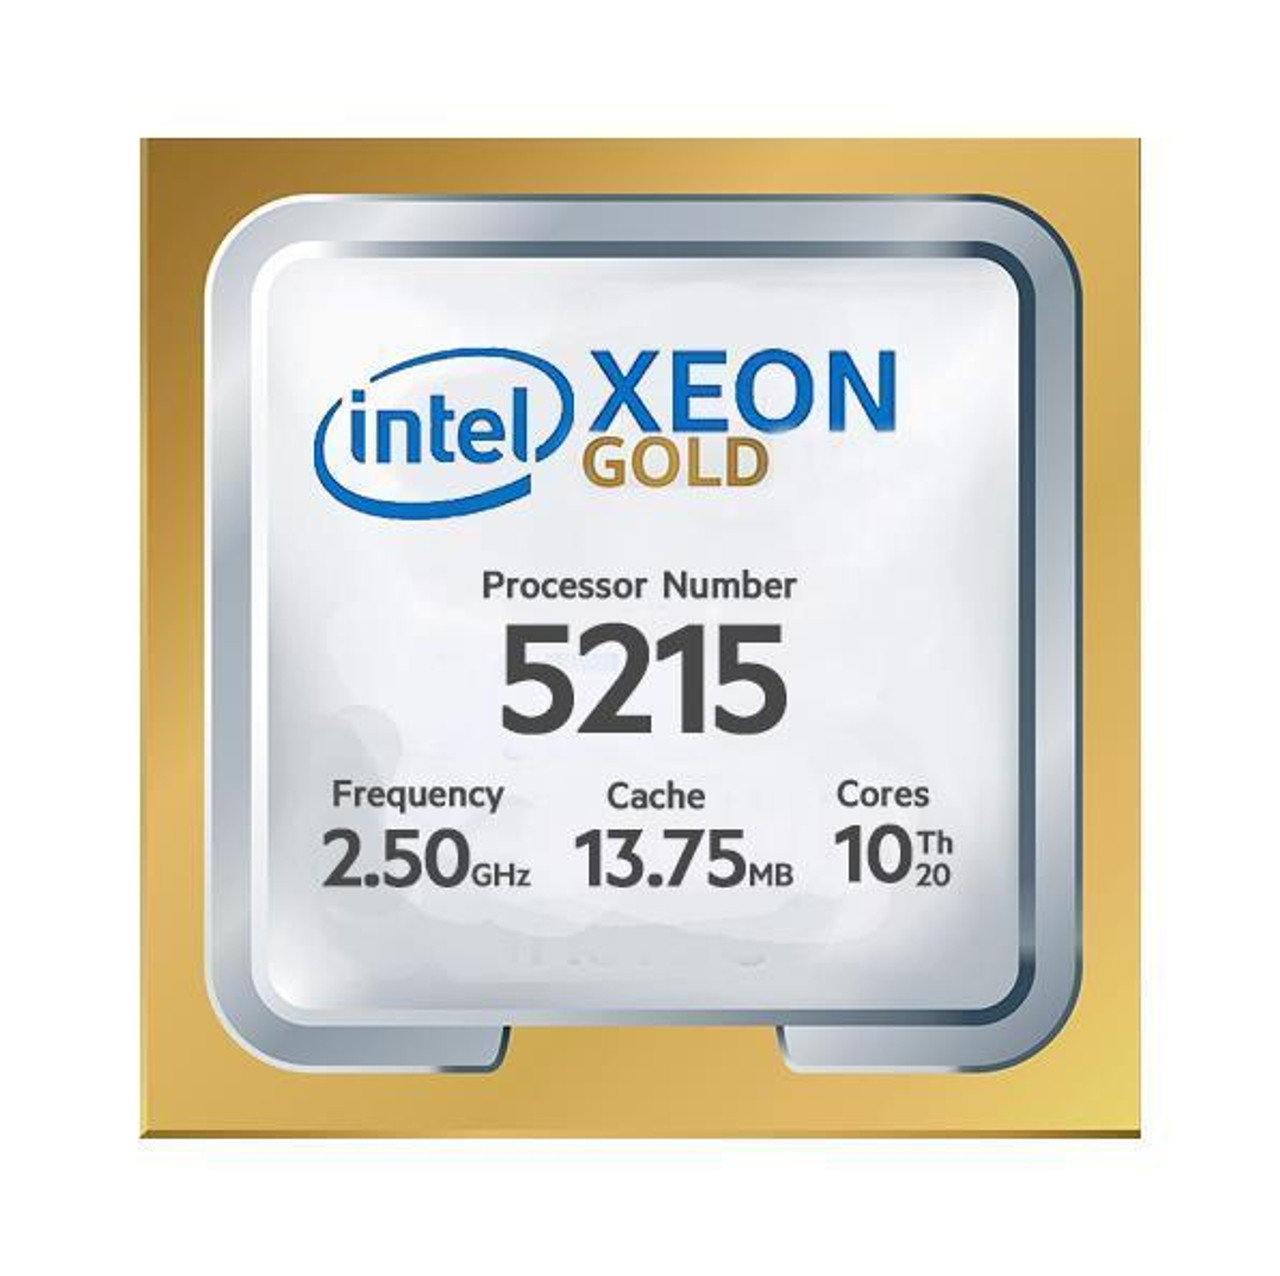 338-BSOW Dell 2.50GHz 13.75MB Cache Socket FCLGA3647 Intel Xeon Gold 5215 10-Core Processor Upgrade